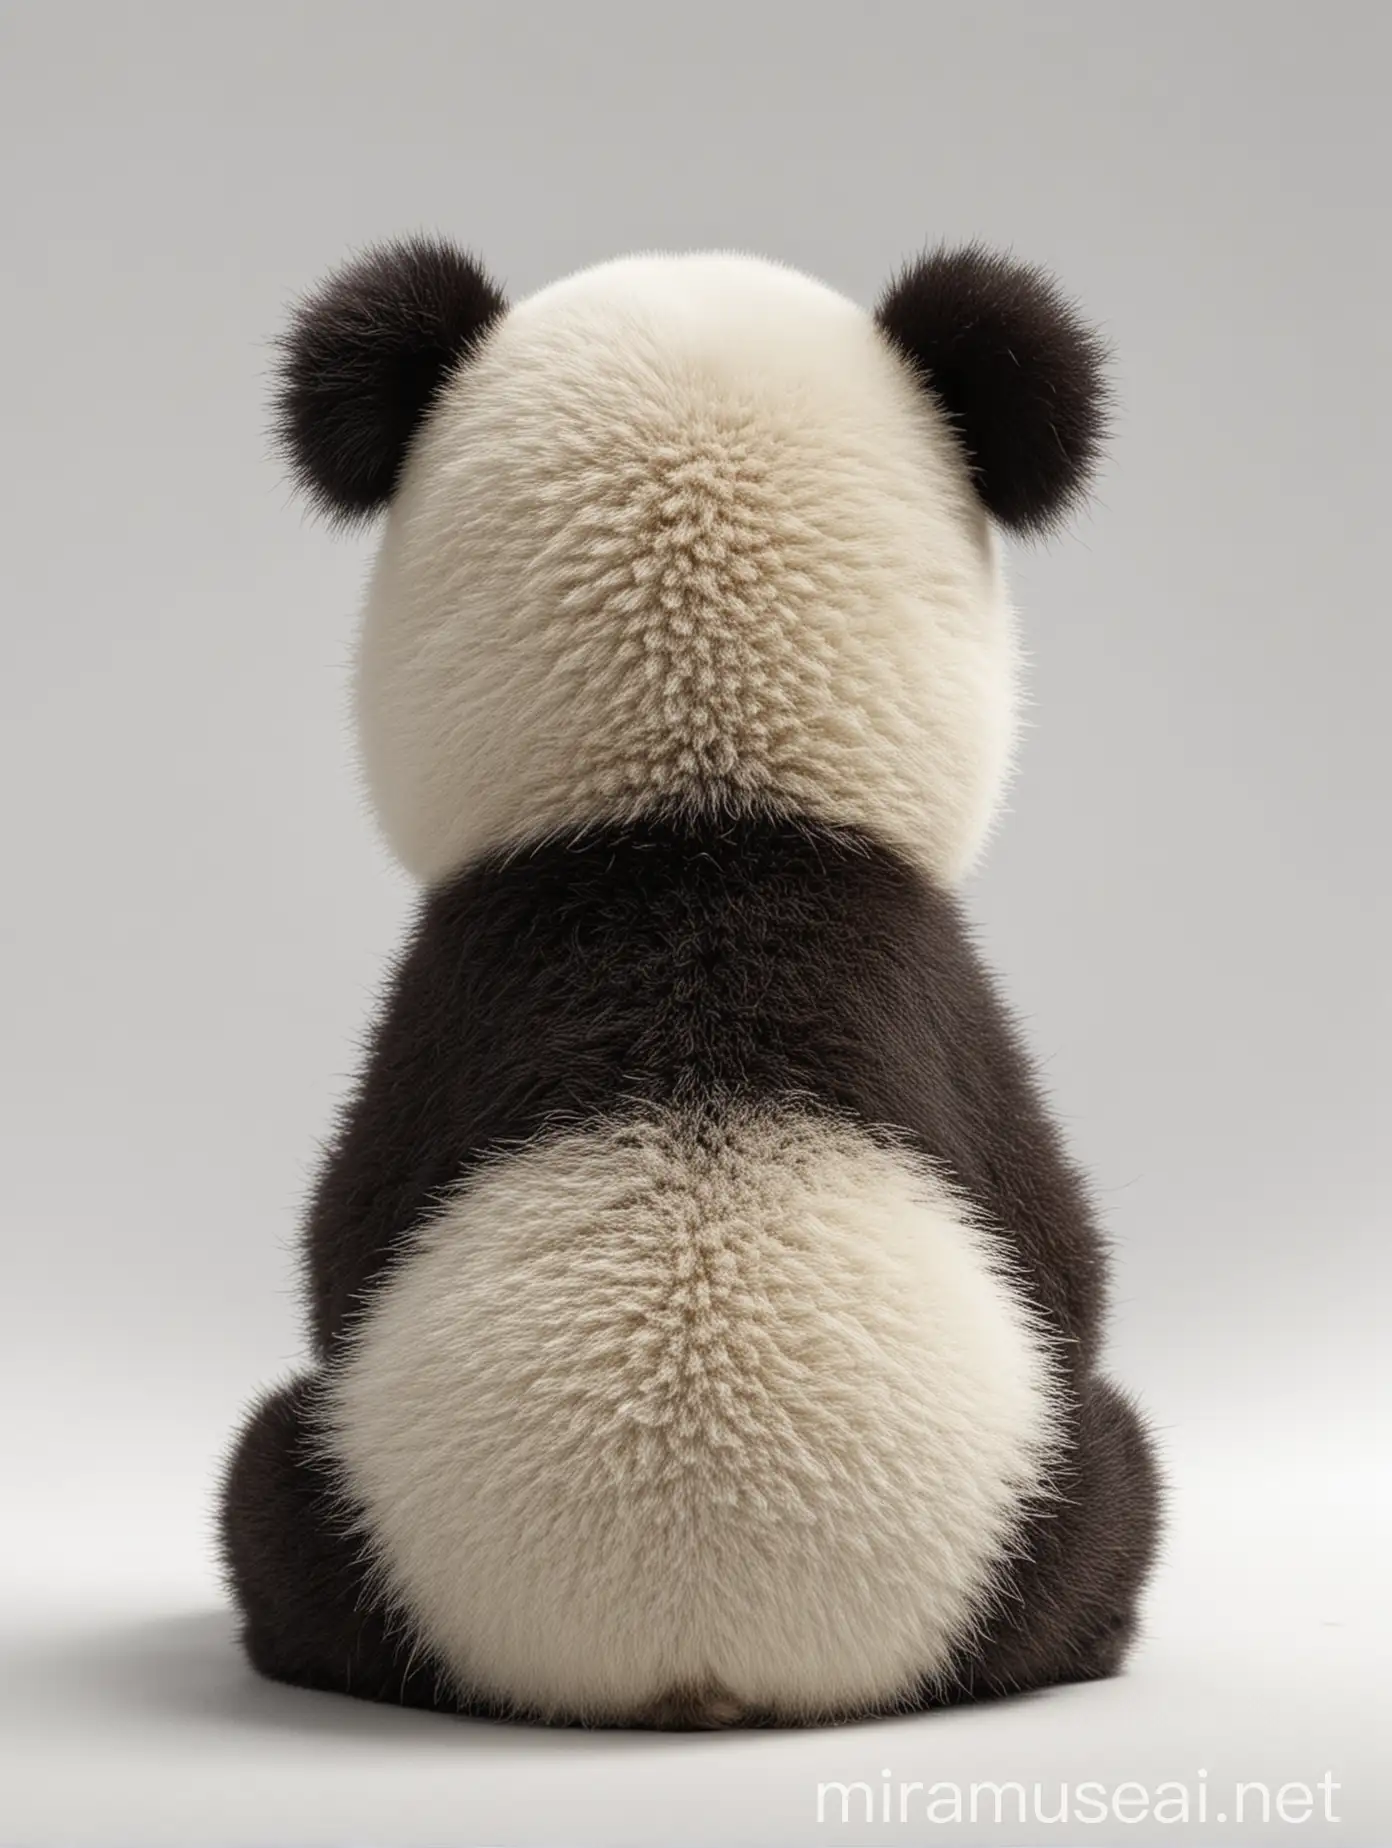 Lonely Little Panda Sitting with Back Turned White Background